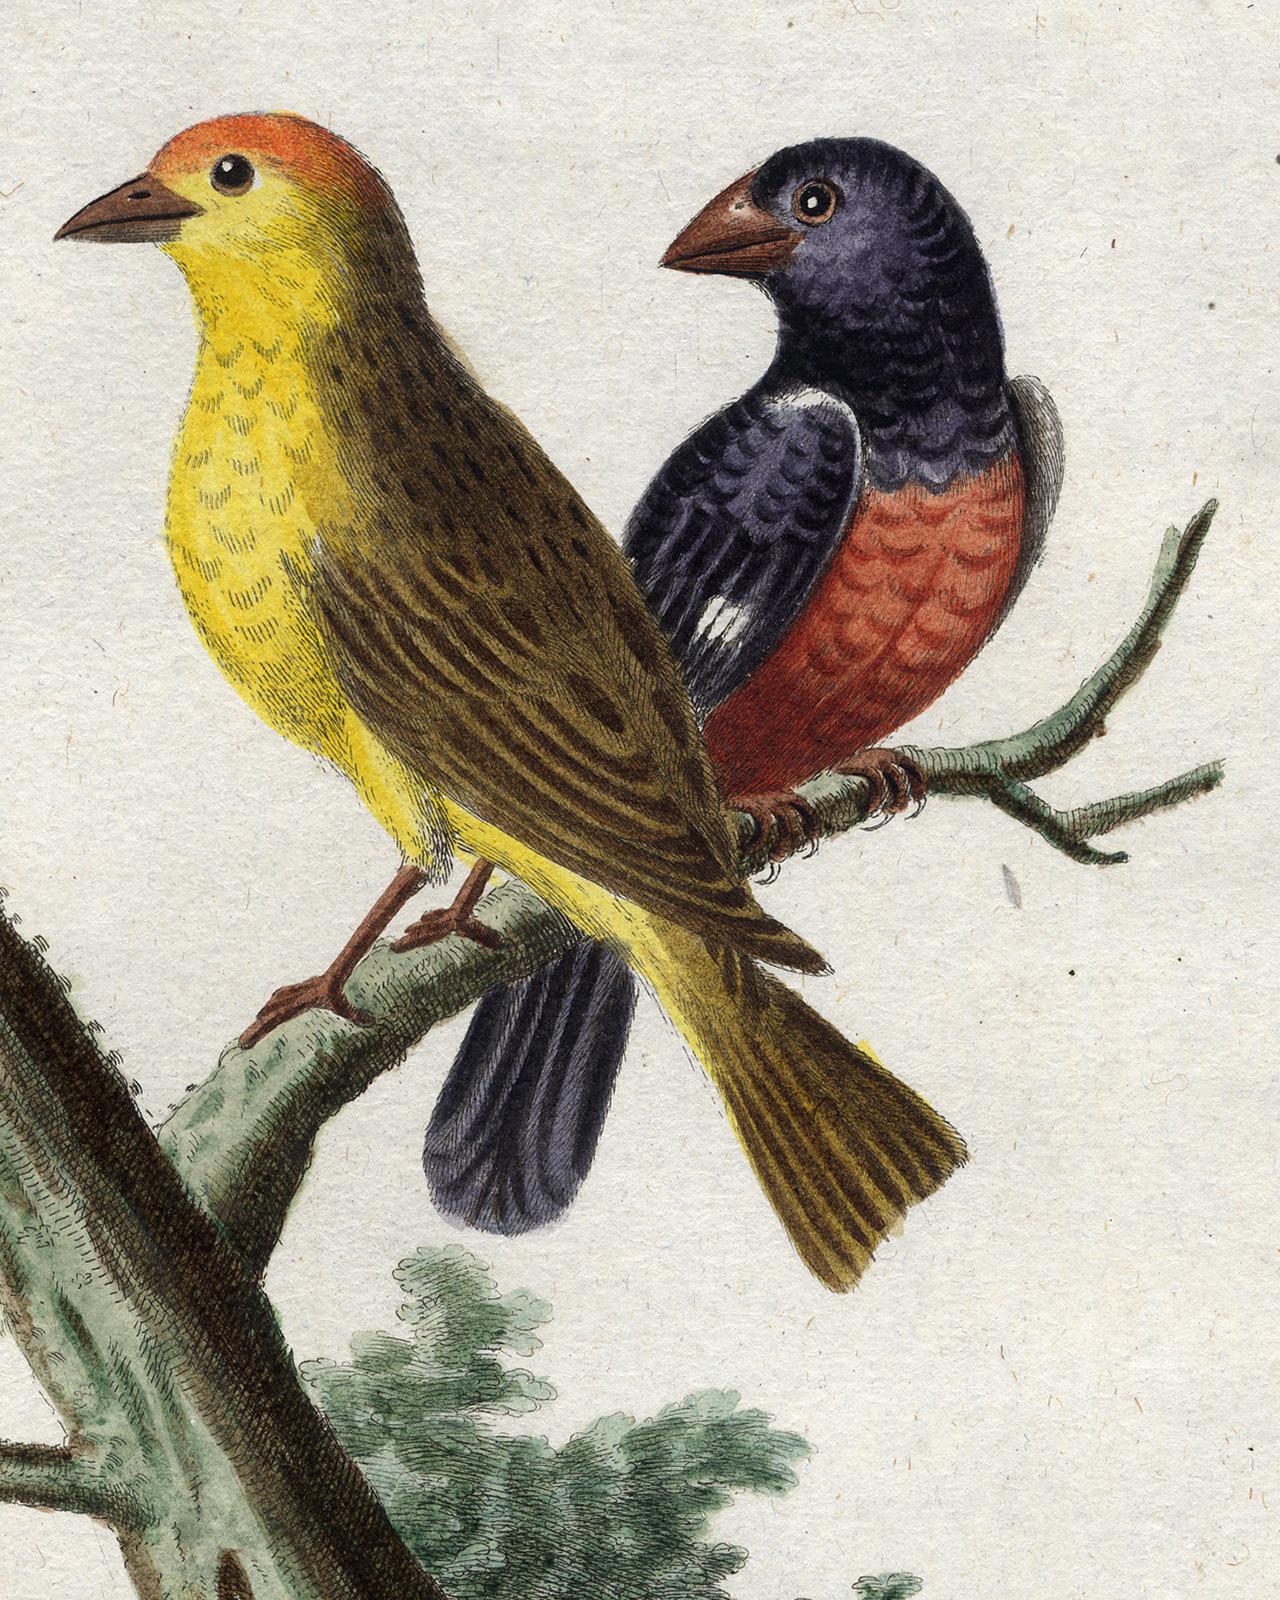 Yellow Red-pole and Black Grosbeak by Seligmann - Handcoloured - 18th century - Old Masters Print by Johann Michael Seligmann